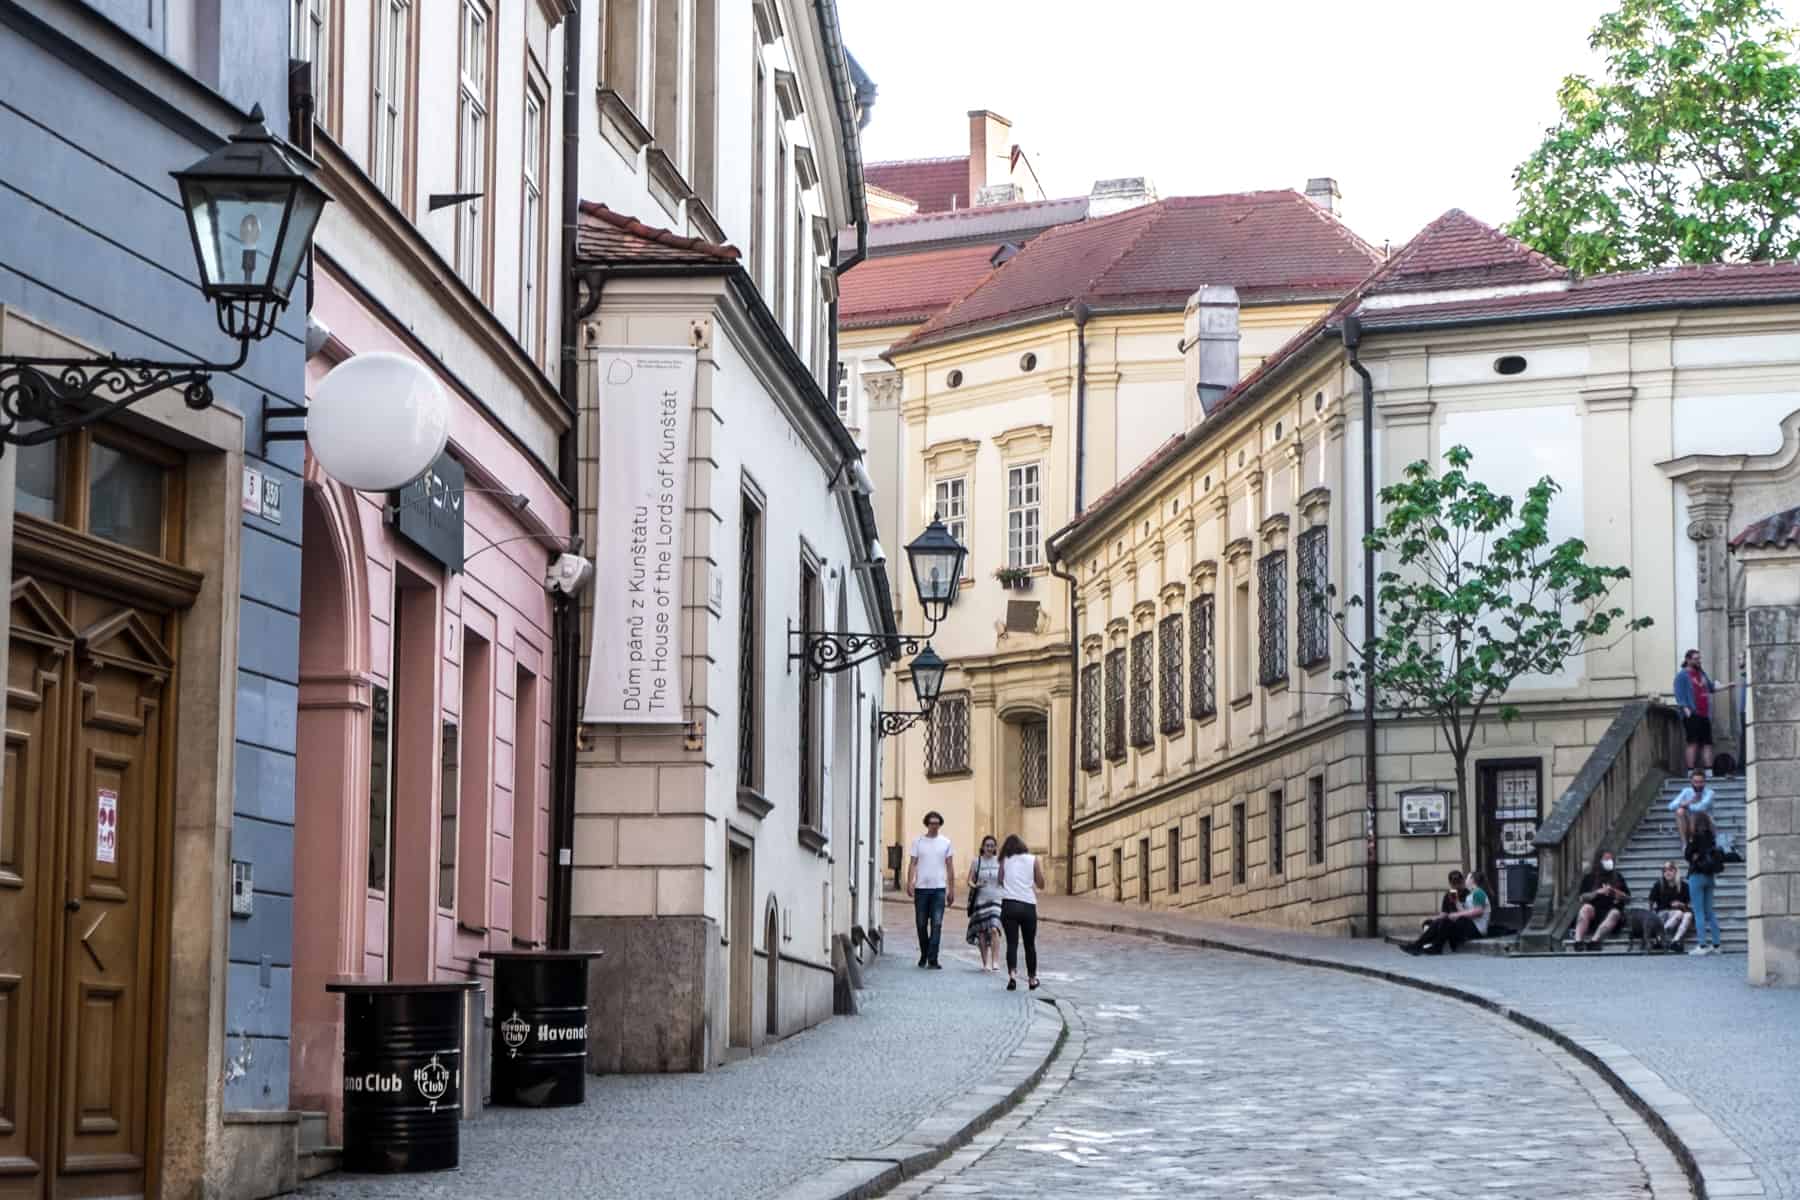 Candy coloured buildings on an old winding stone street of Brno, Czech Republic.